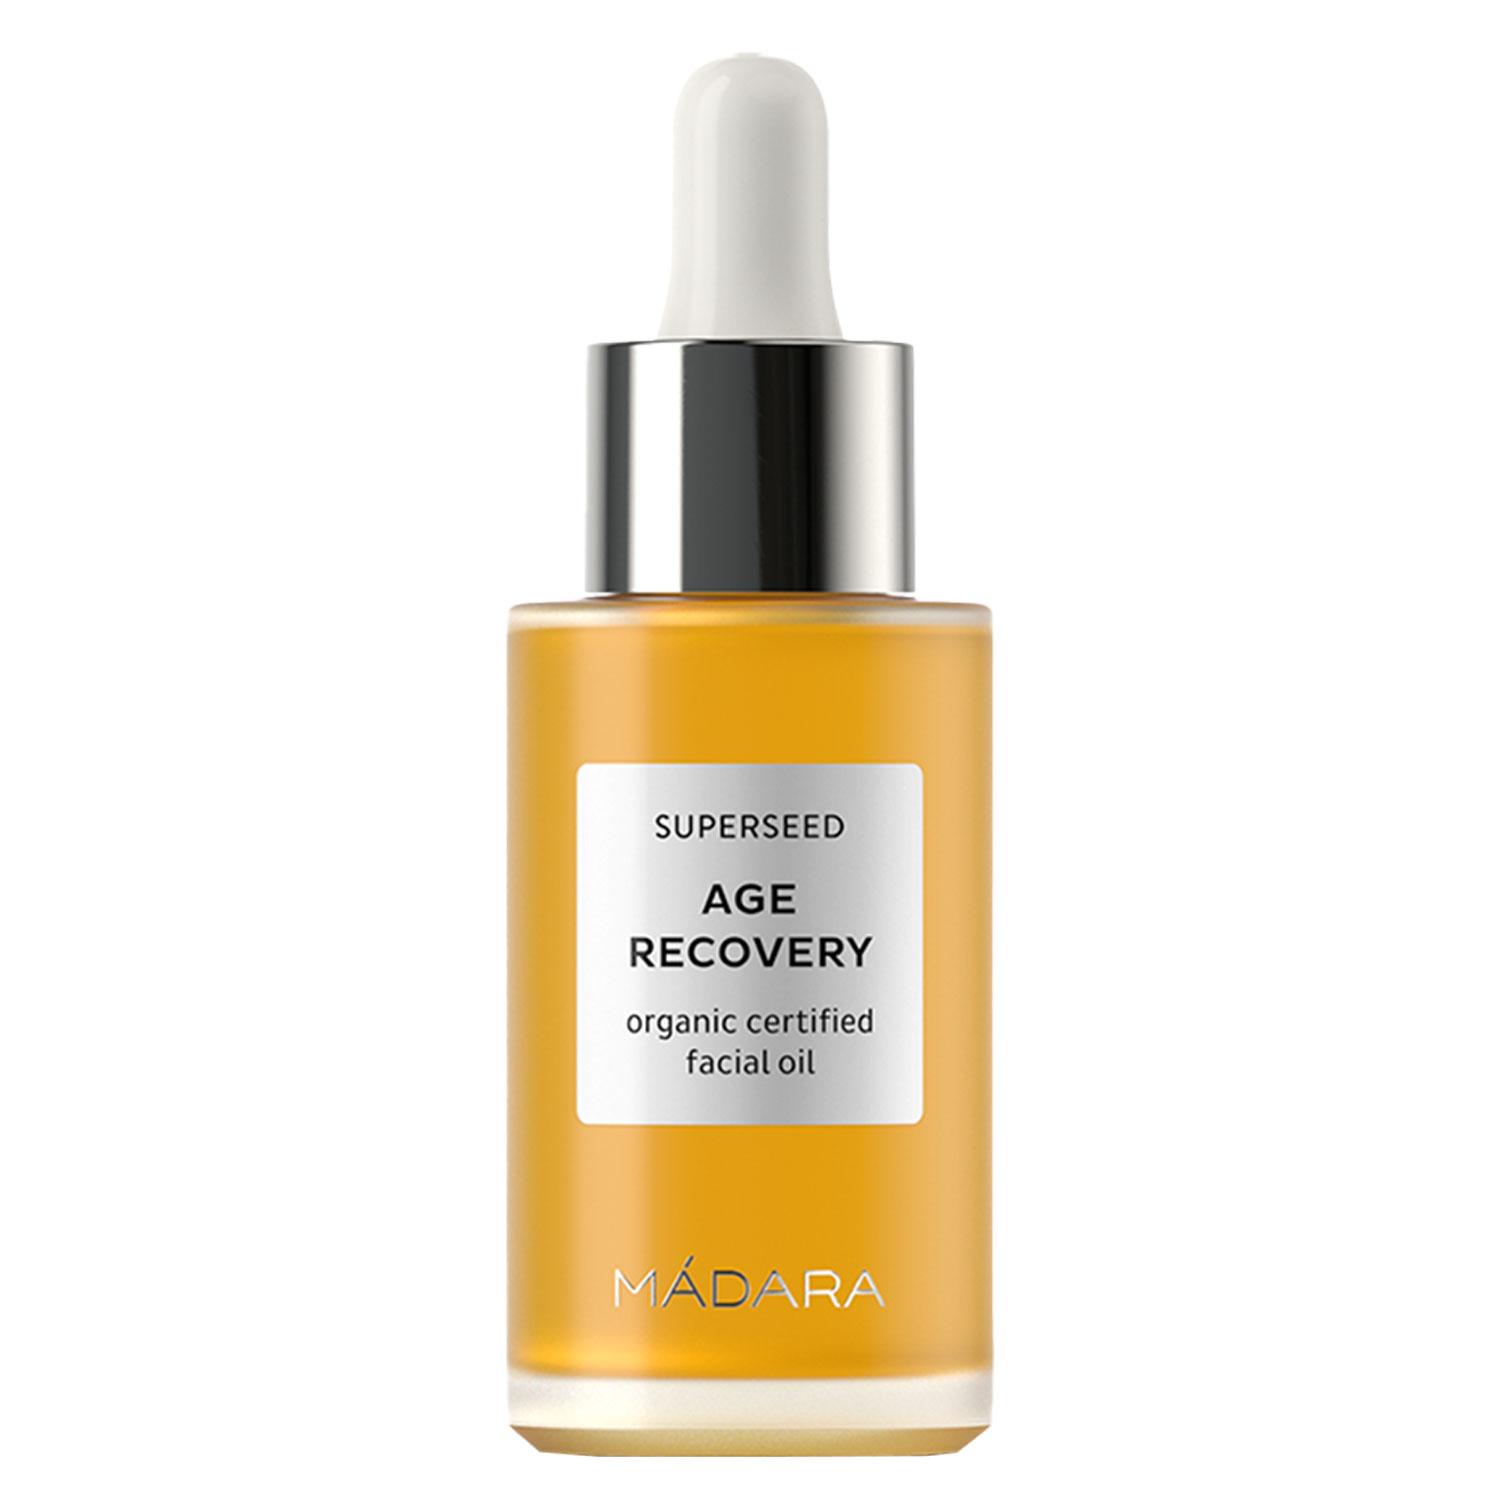 MÁDARA Care - Superseed Age Recovery Facial Oil